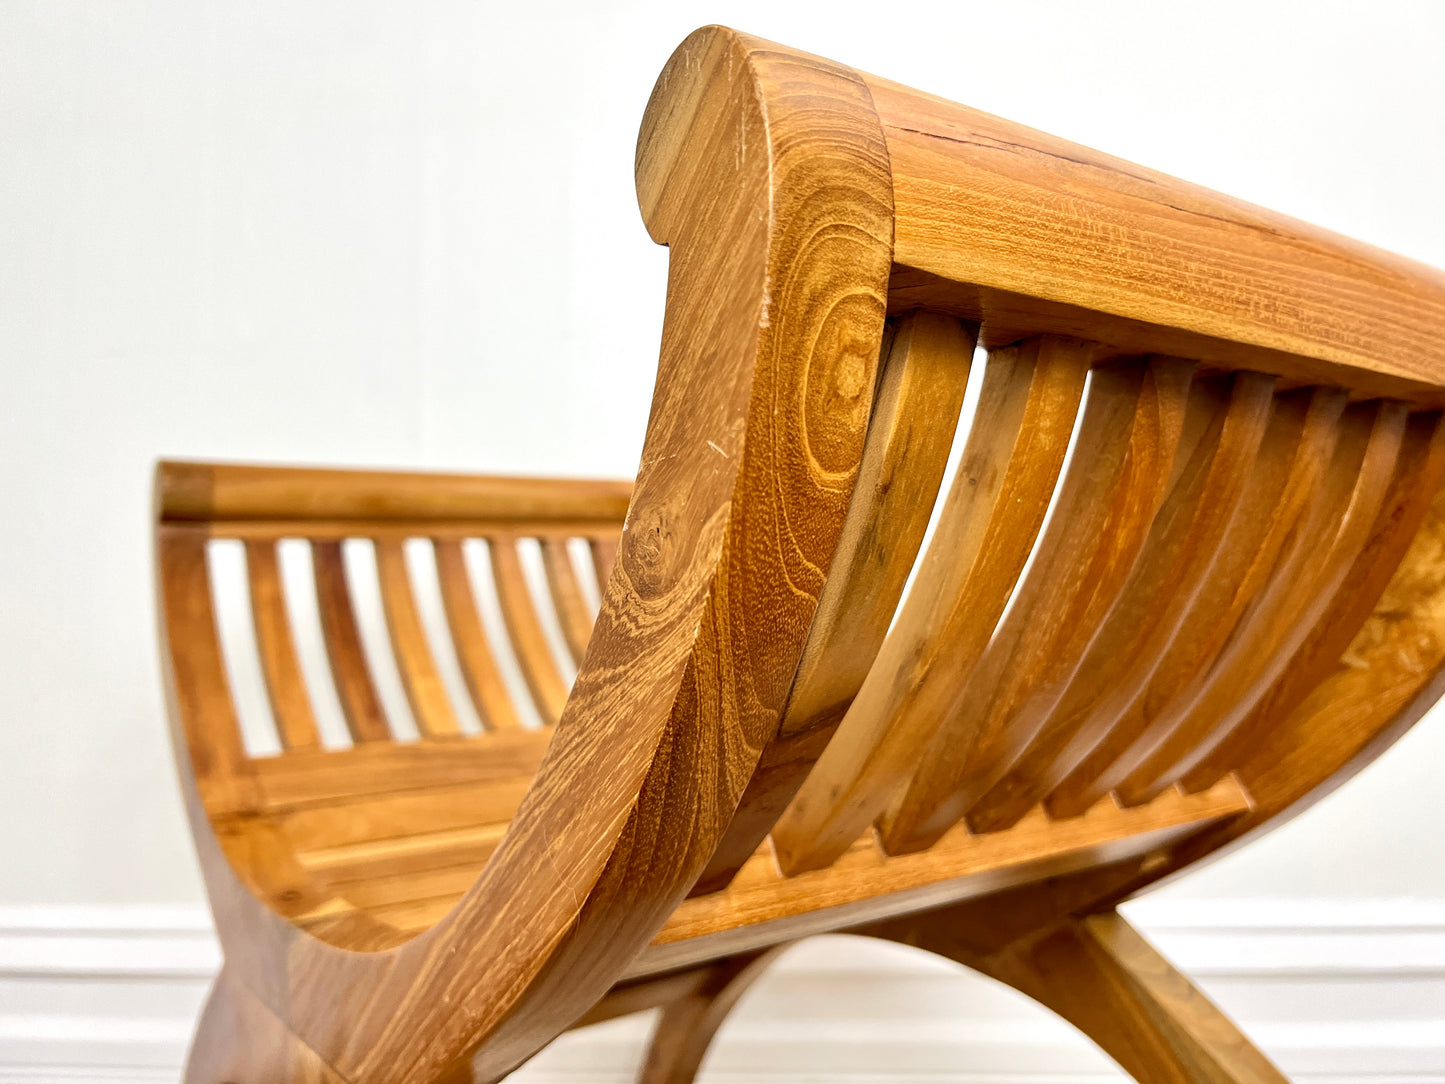 The Fruitwood Bench